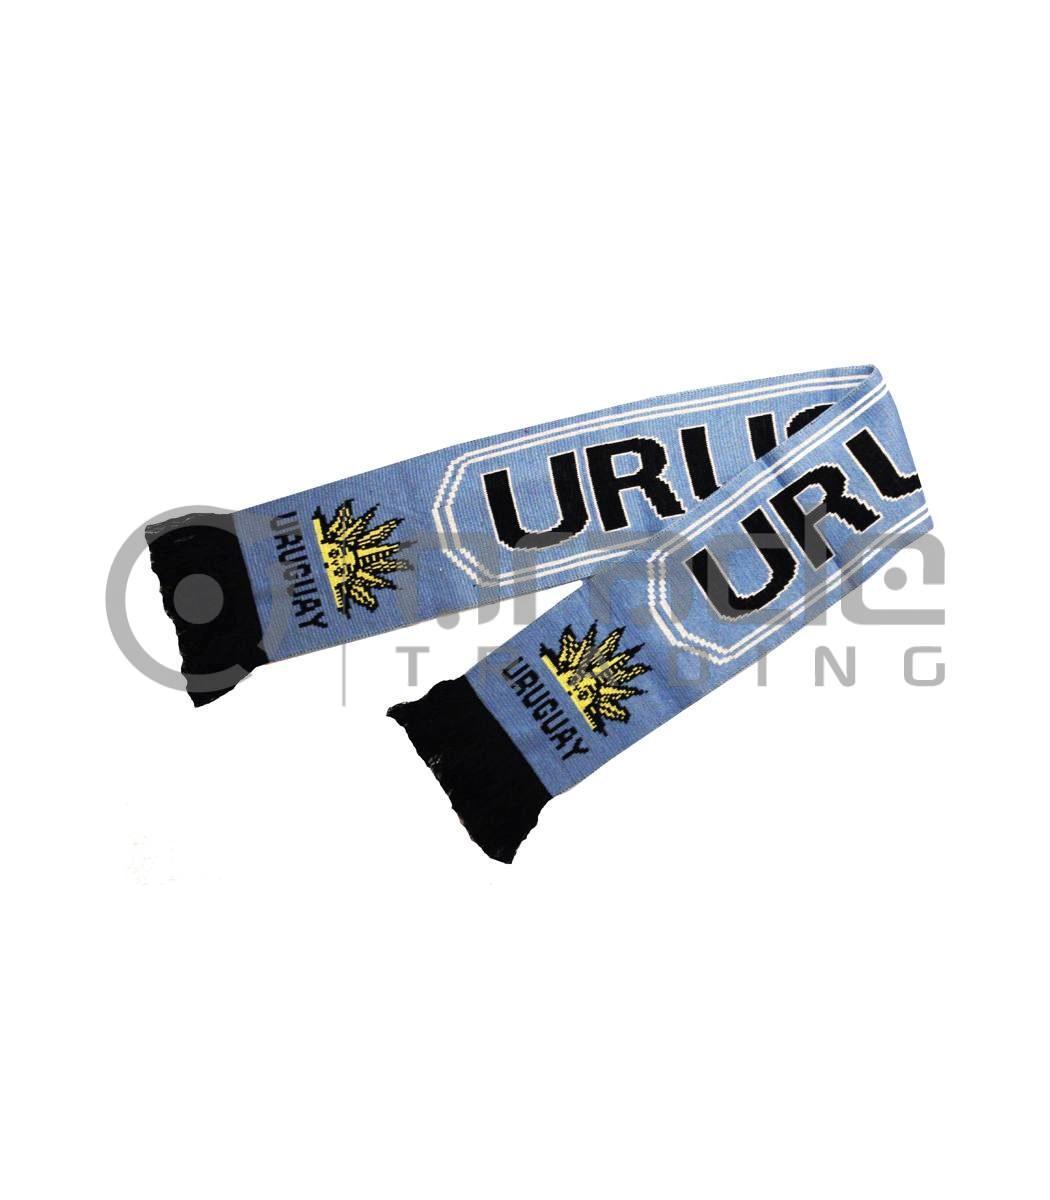 Uruguay Knitted Scarf